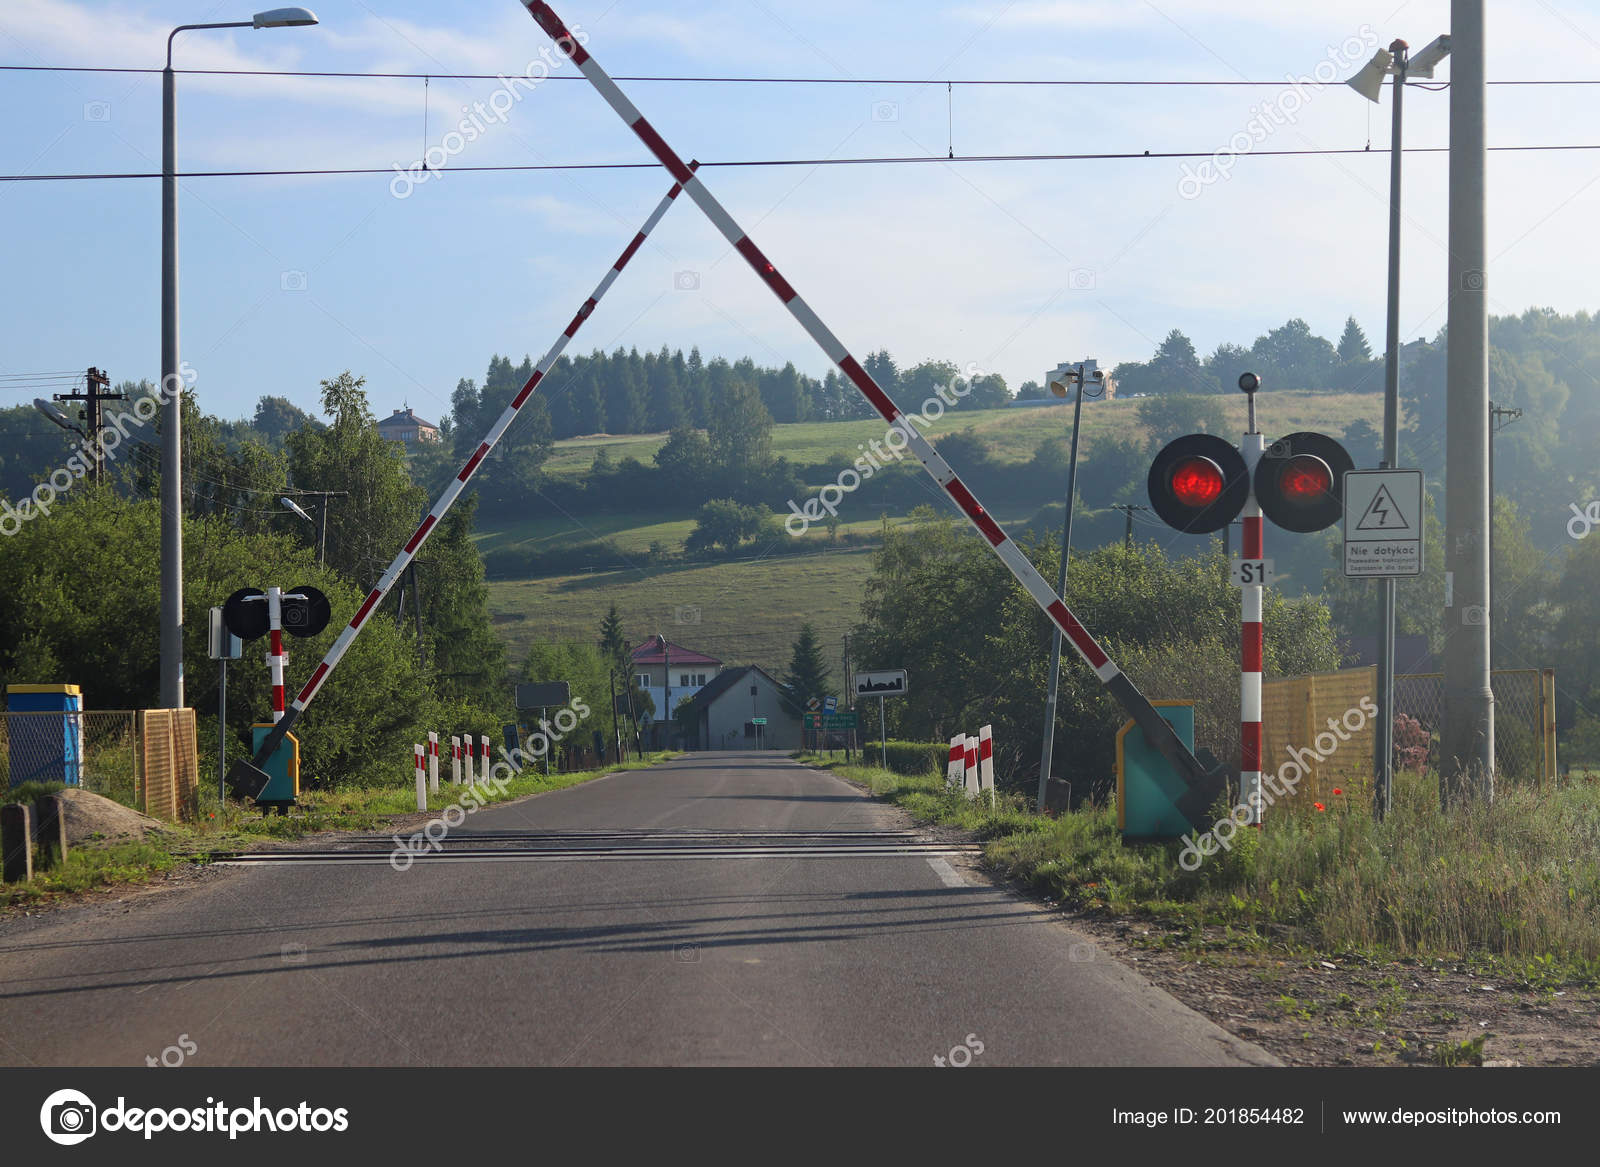 Road Signs Railway Crossing Barrier Organization Transport System European Country Stock Photo By C Xatolux